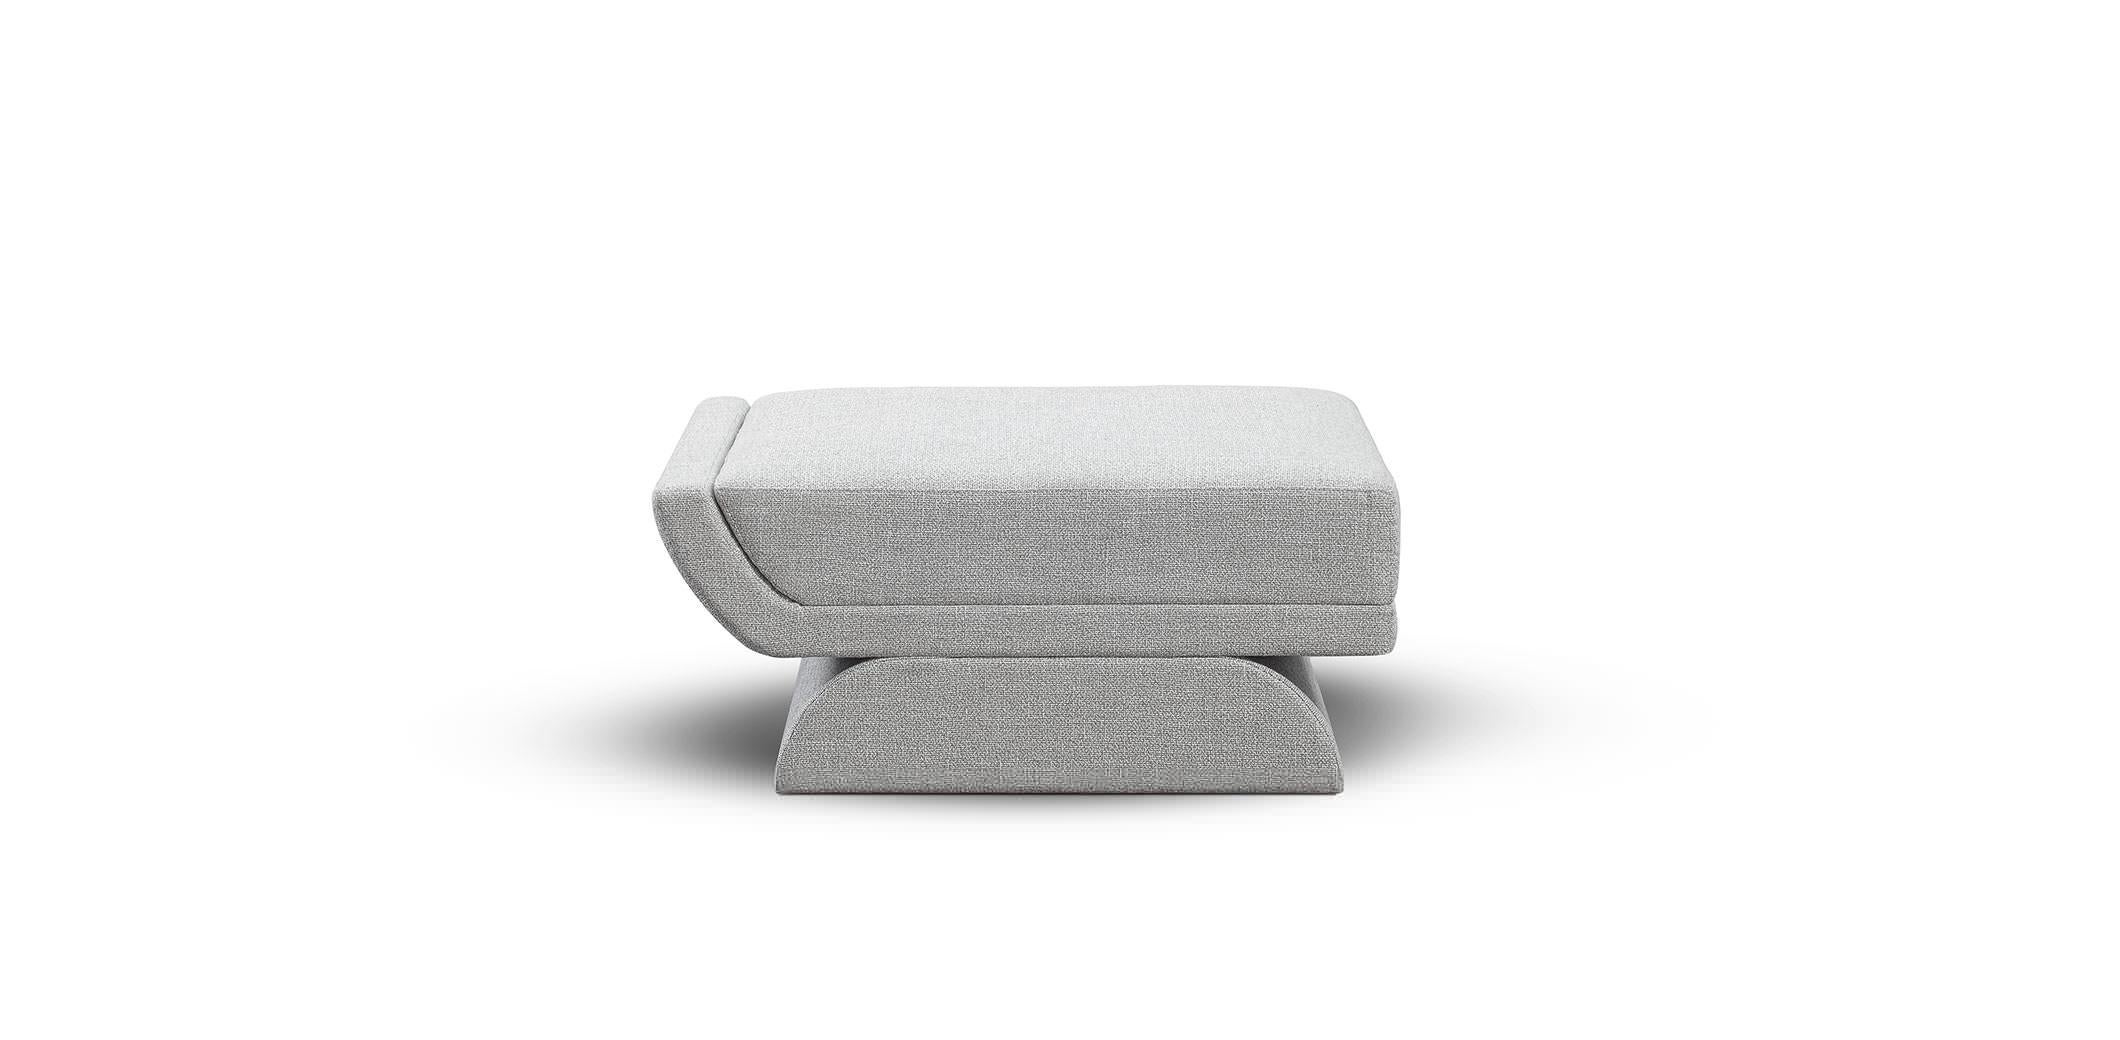 Oscar Backless Modular Sofa by DUISTT 
Dimensions: W 95 x D 101 x H 40 cm
Materials: Duistt Fabric

Inspired by the curved lines poetry of Oscar Niemeyer’s architecture, OSCAR modular sofa allures for its sensual and free-flowing curves. Like